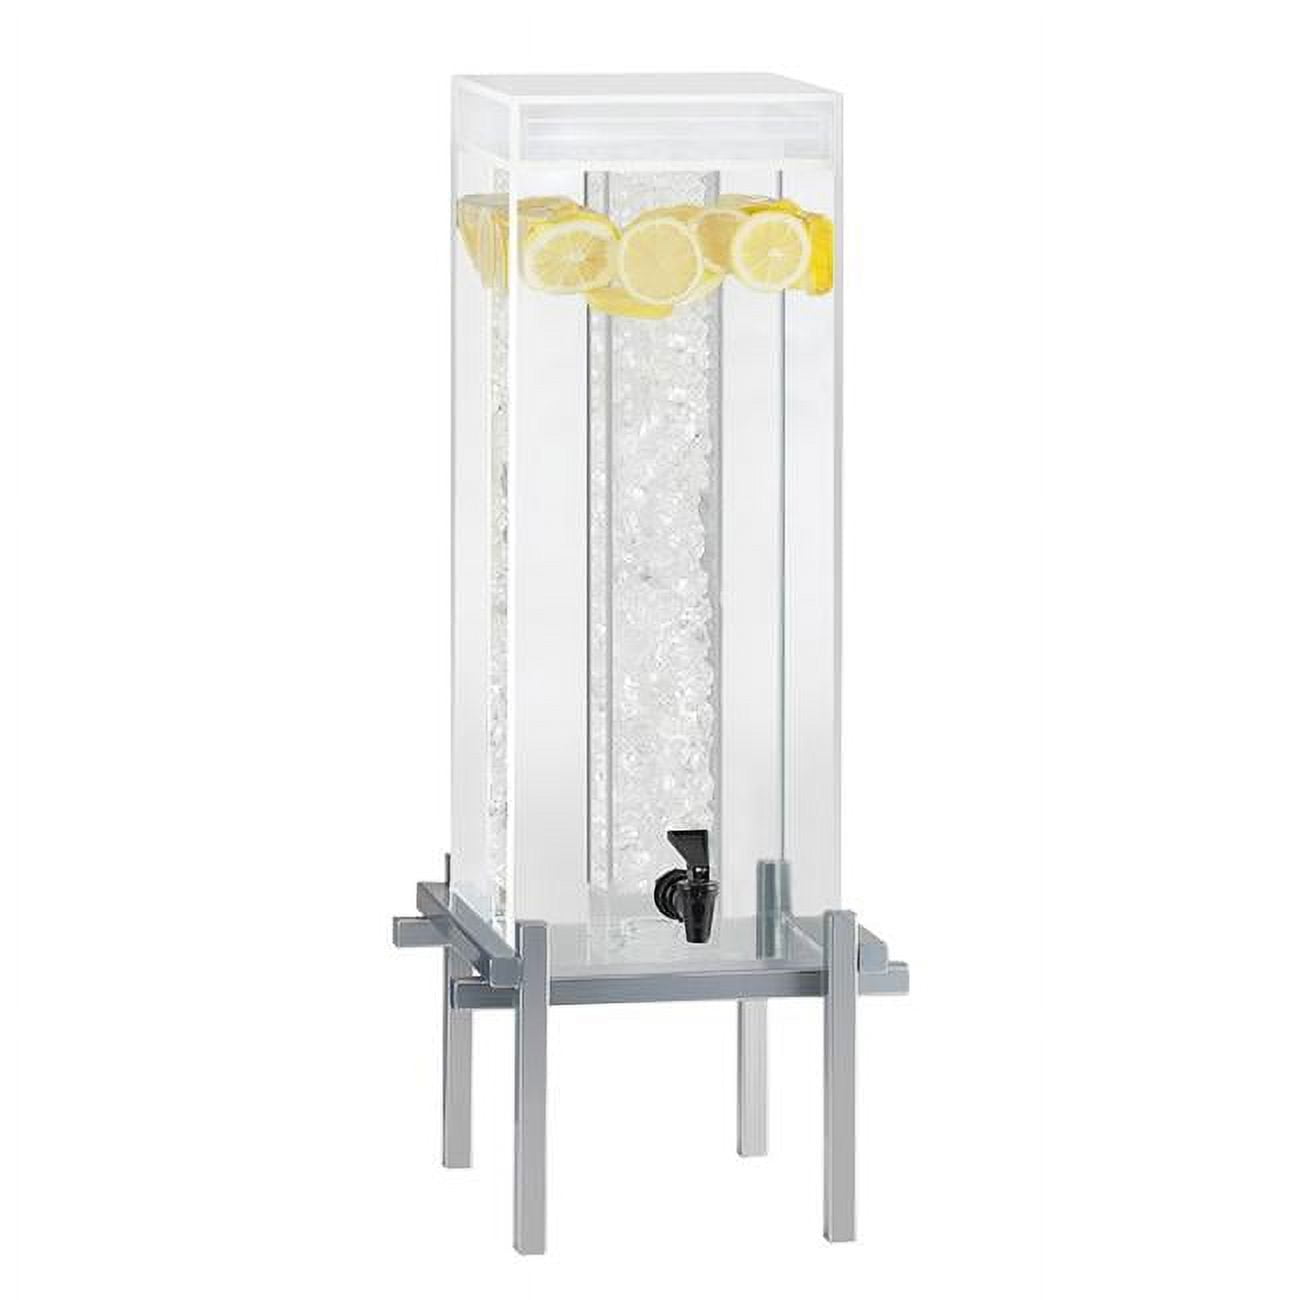 Picture of Cal Mil 1132-5-74 5 gal Beverage Dispenser&#44; Silver - 11.625 x 11.875 x 28.875 in.